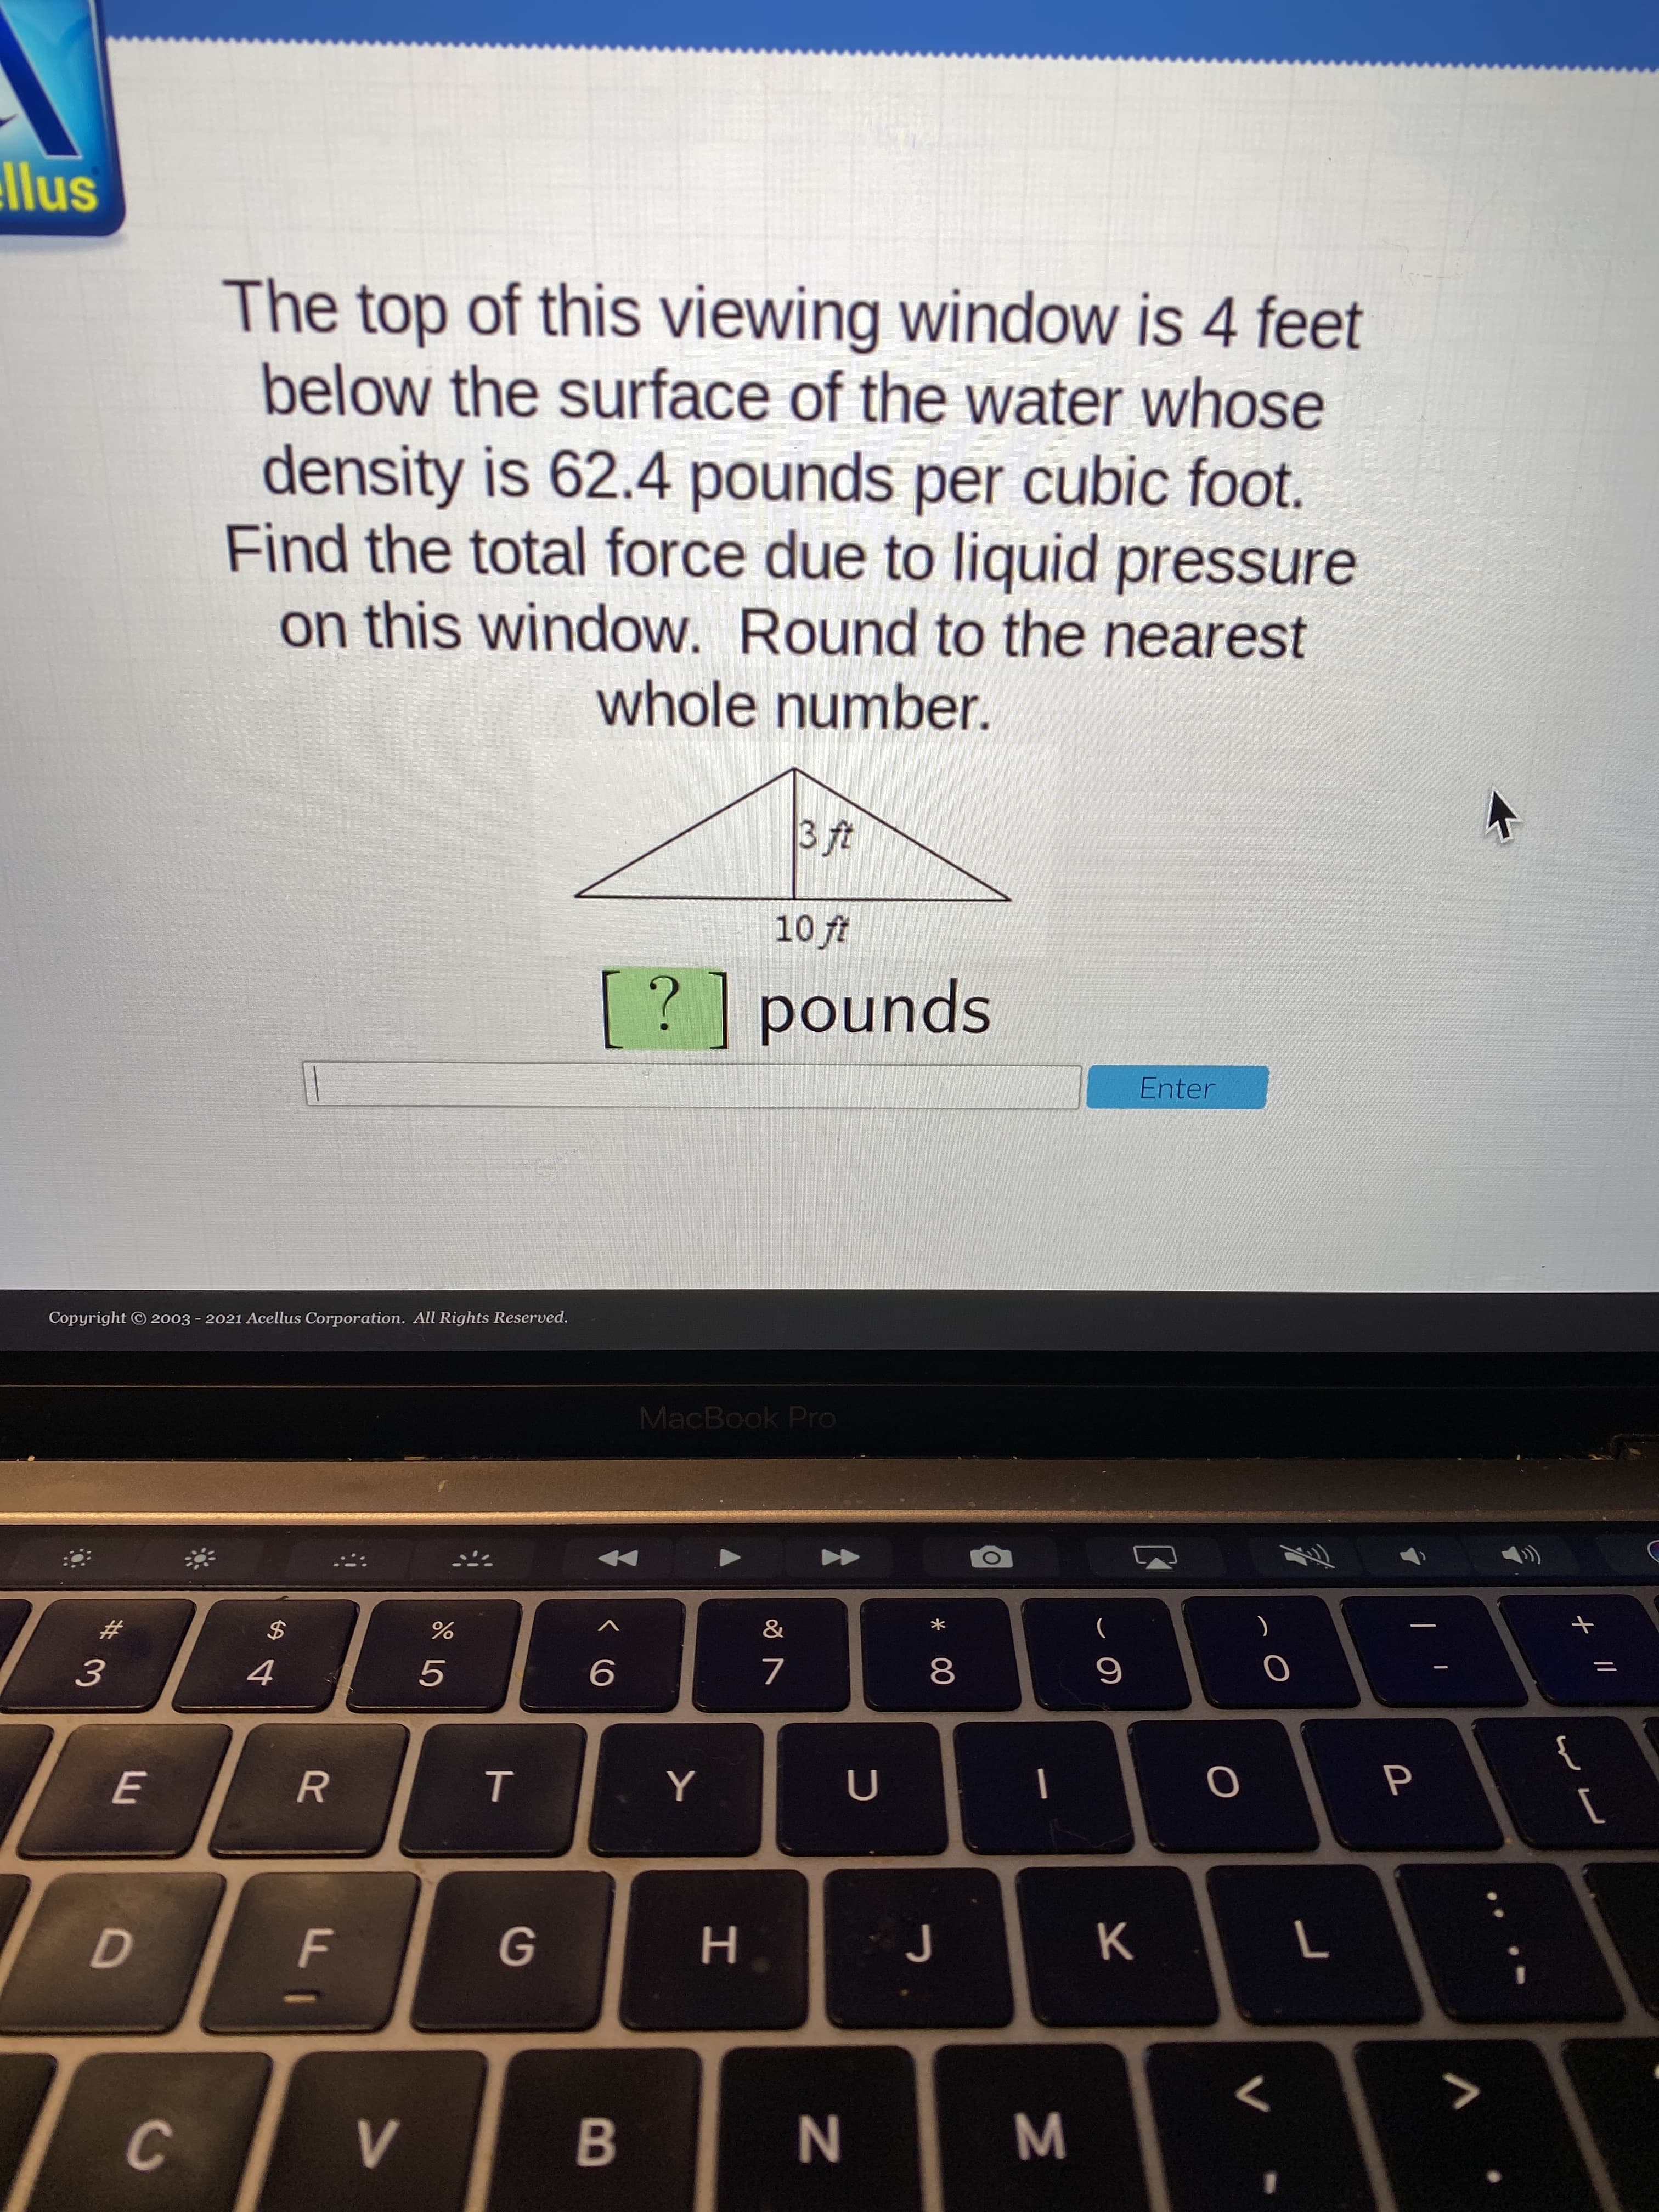 The top of this viewing window is 4 feet
below the surface of the water whose
density is 62.4 pounds per cubic foot.
Find the total force due to liquid pressure
on this window. Round to the nearest
whole number.
3 ft
10 ft
